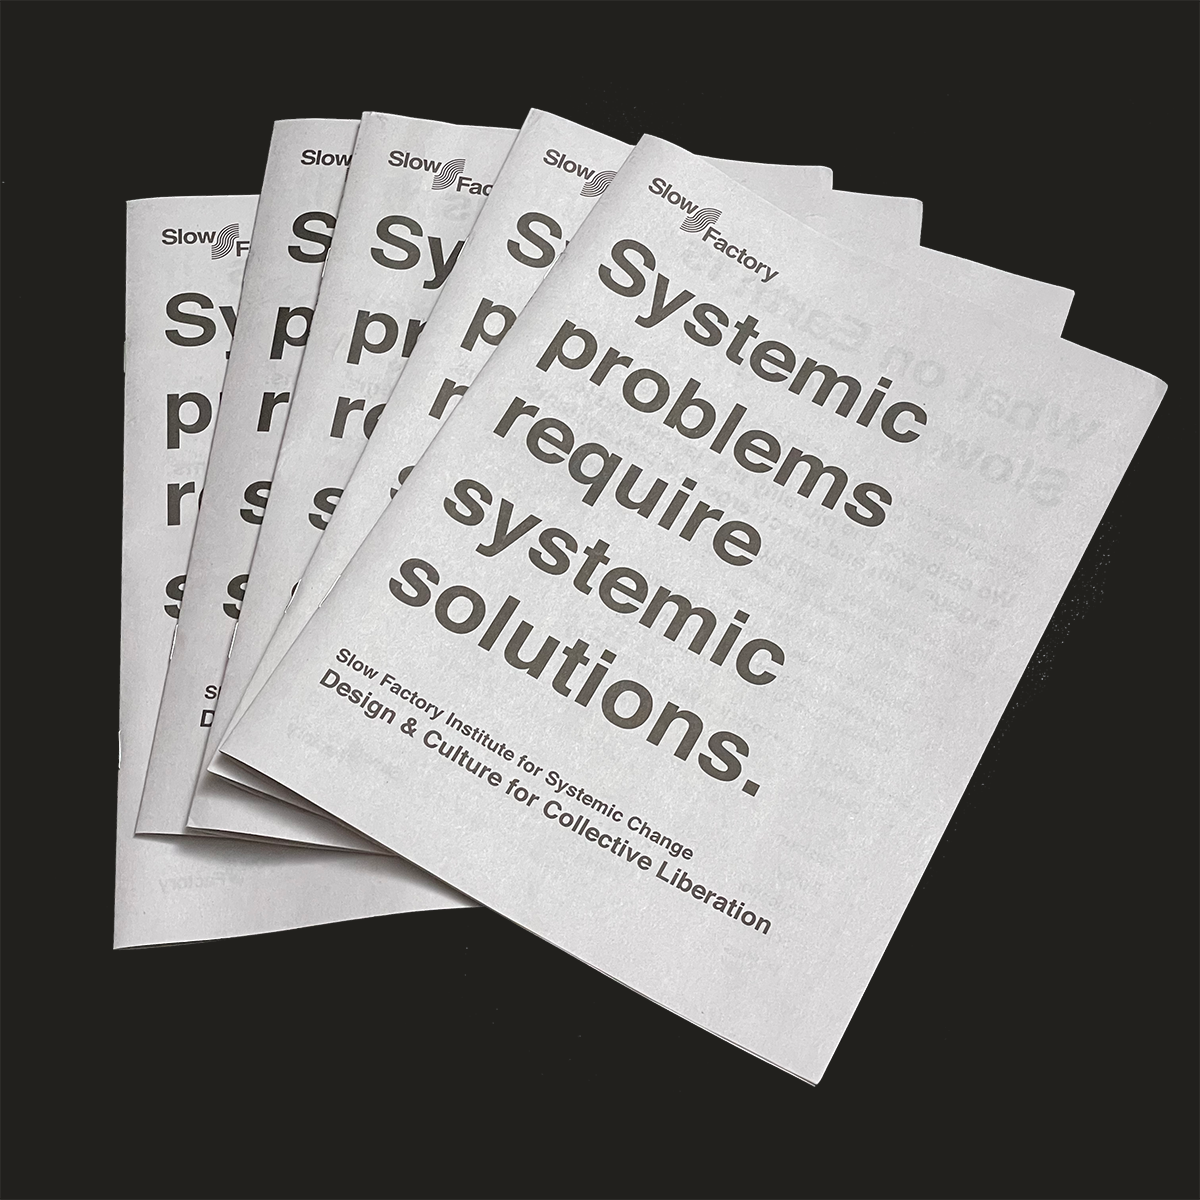 Slow Factory Institute for Systemic Change White Paper